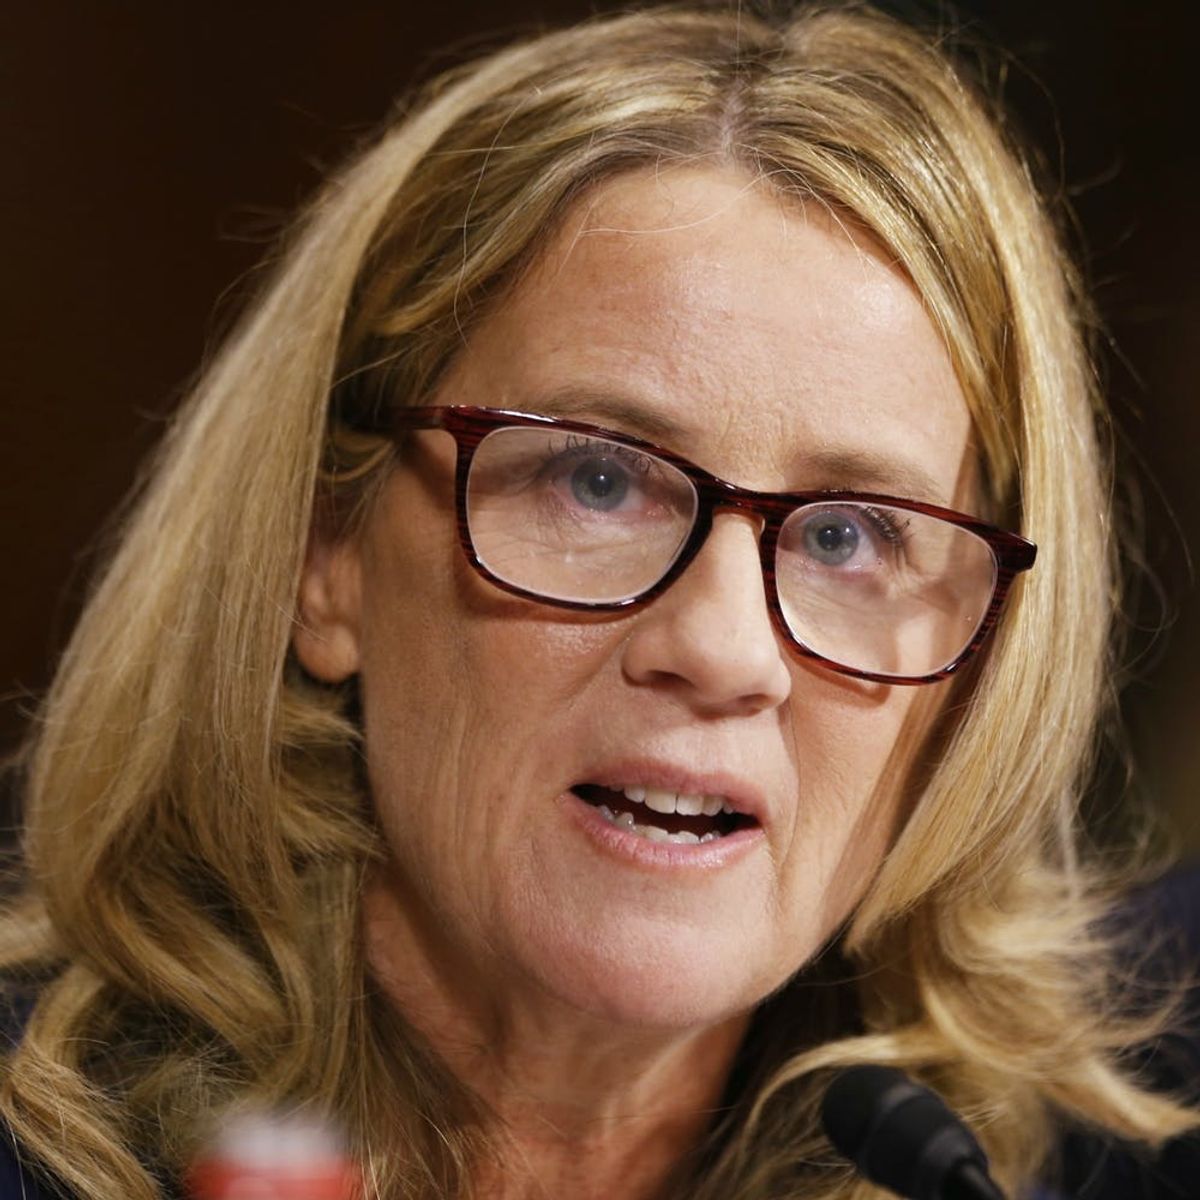 The 6 Biggest Moments from Christine Blasey Ford’s Senate Testimony